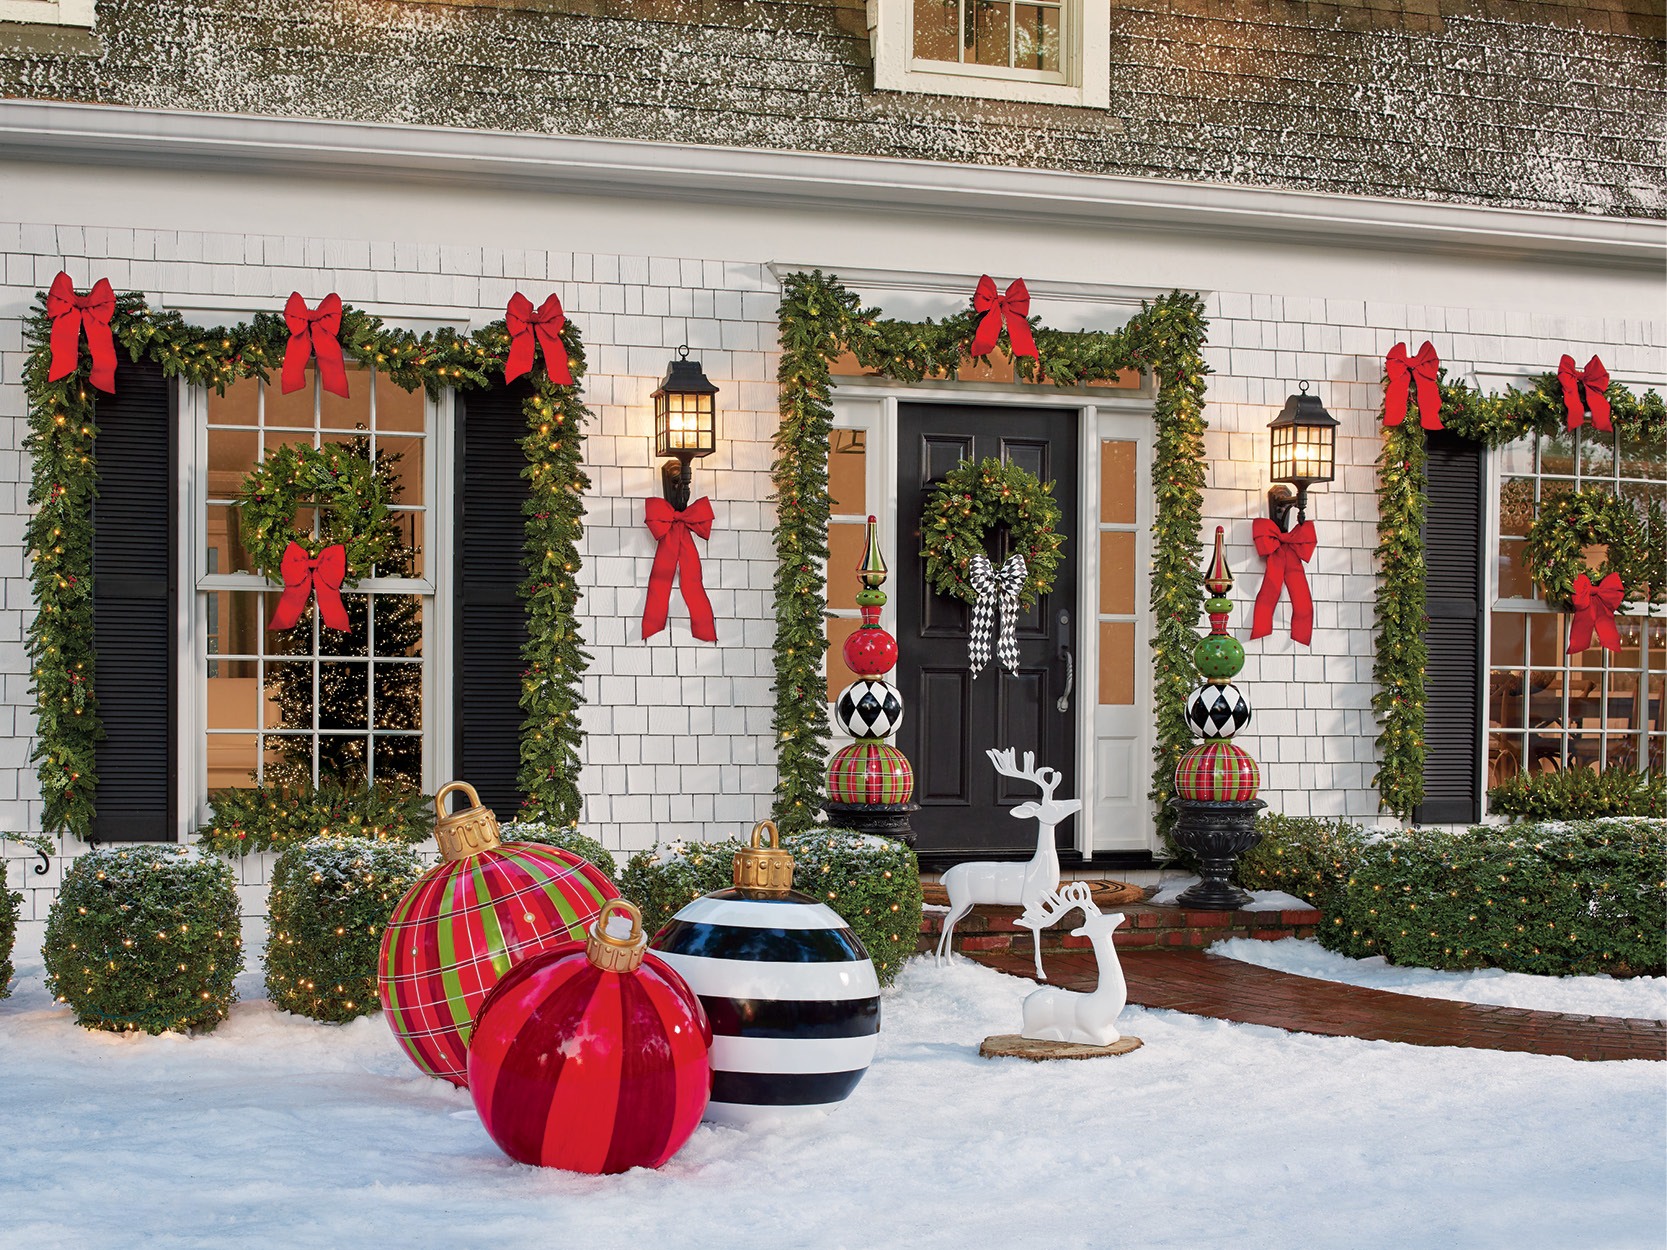 Evergreen Wreaths, Garlands & Bows - 8 Ways to Decorate Your Timber Windows at Christmas